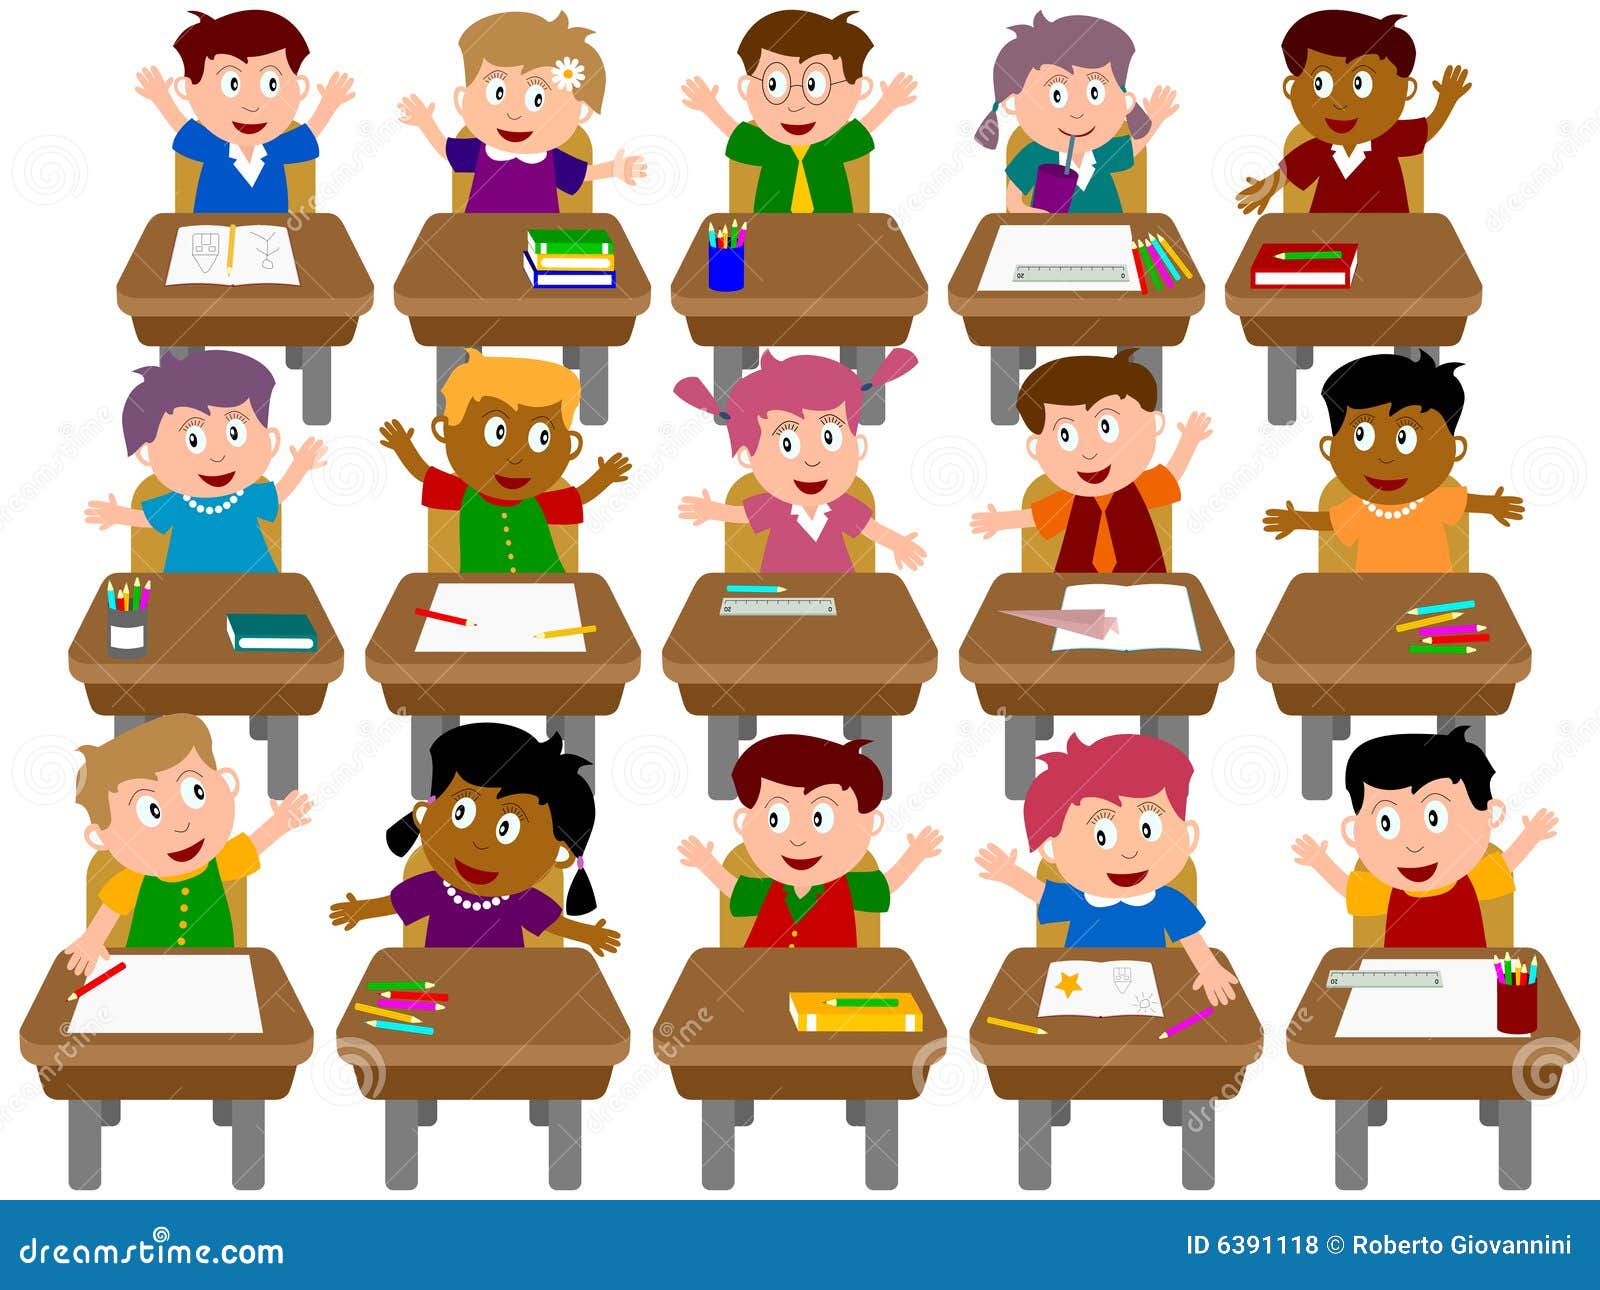 clipart of objects in a classroom - photo #47